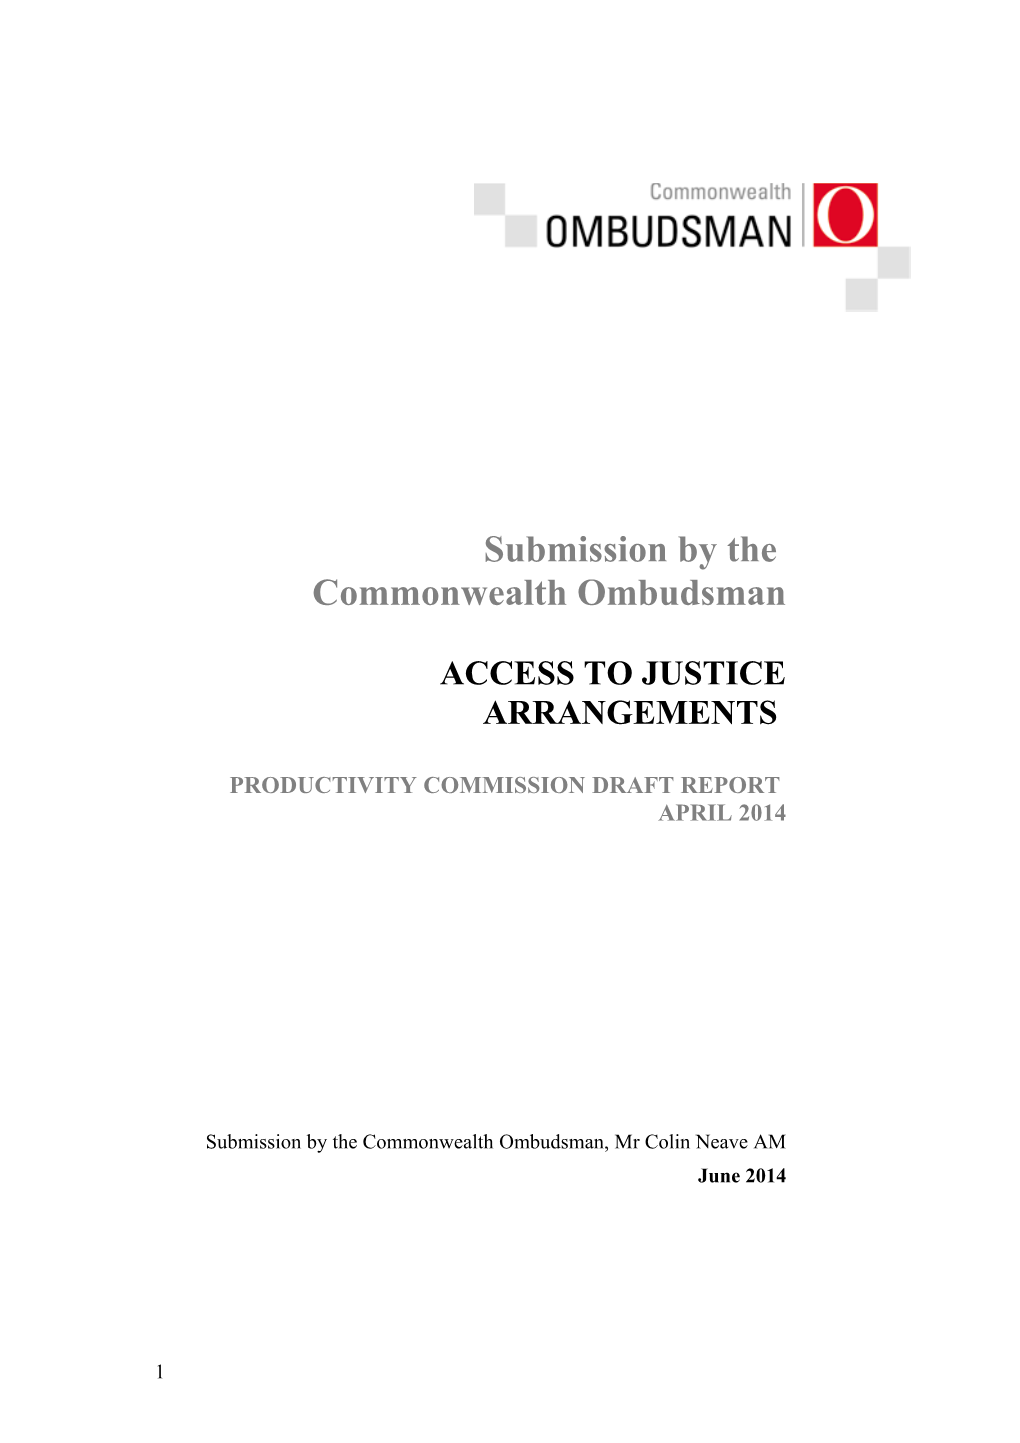 Submission DR282 - Commonwealth Ombudsman (Australia) - Access to Justice Arrangements